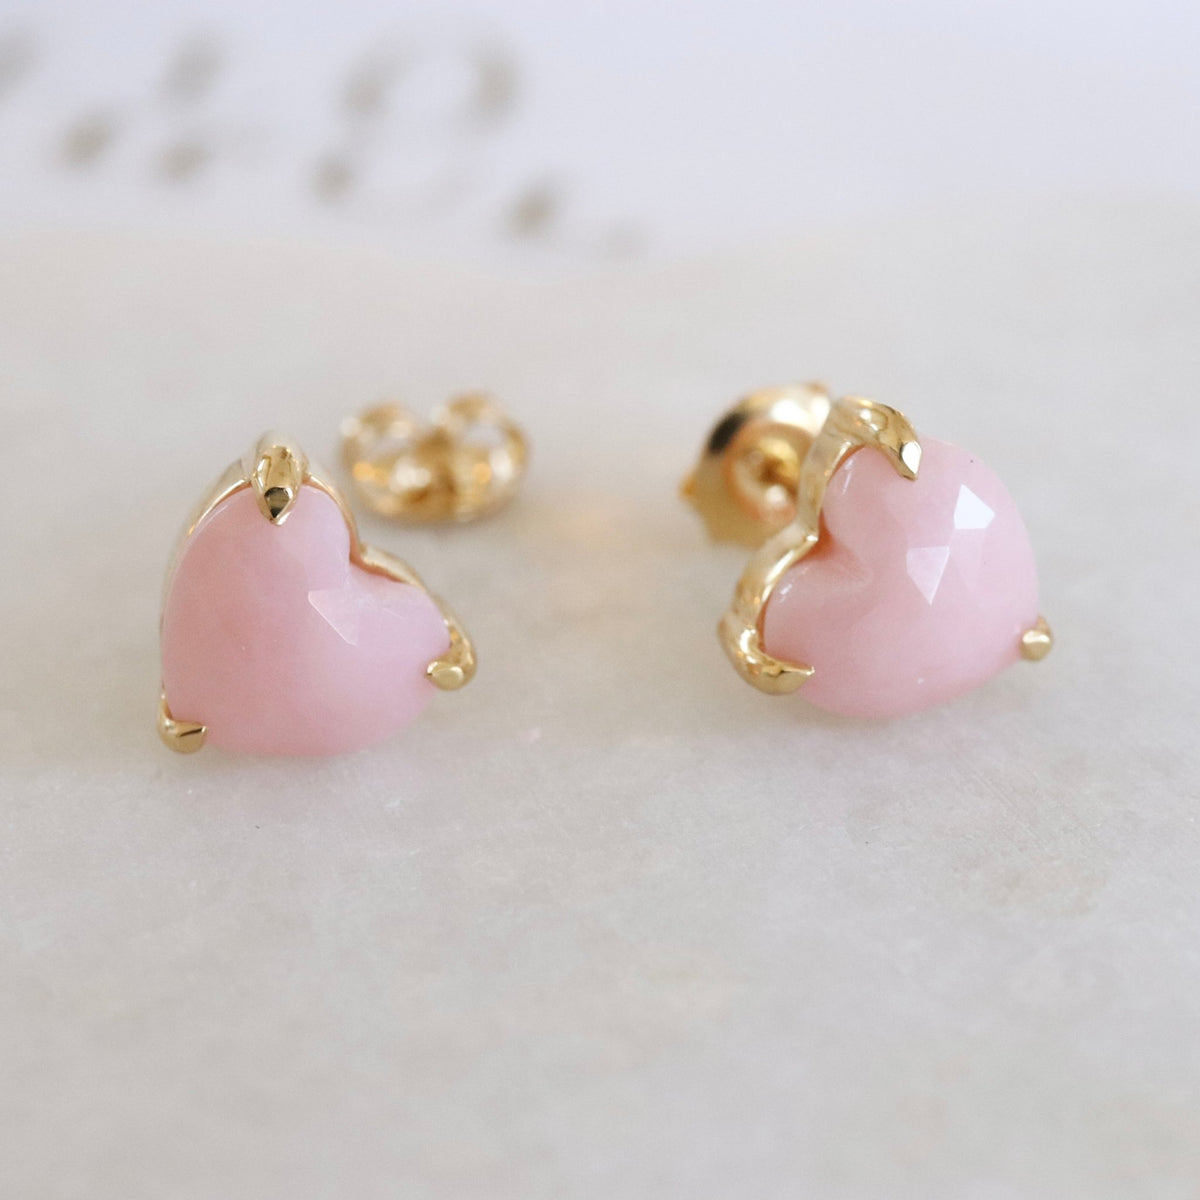 FRAICHE INSPIRE SWEETHEART STUDS - PINK OPAL &amp; GOLD - SO PRETTY CARA COTTER